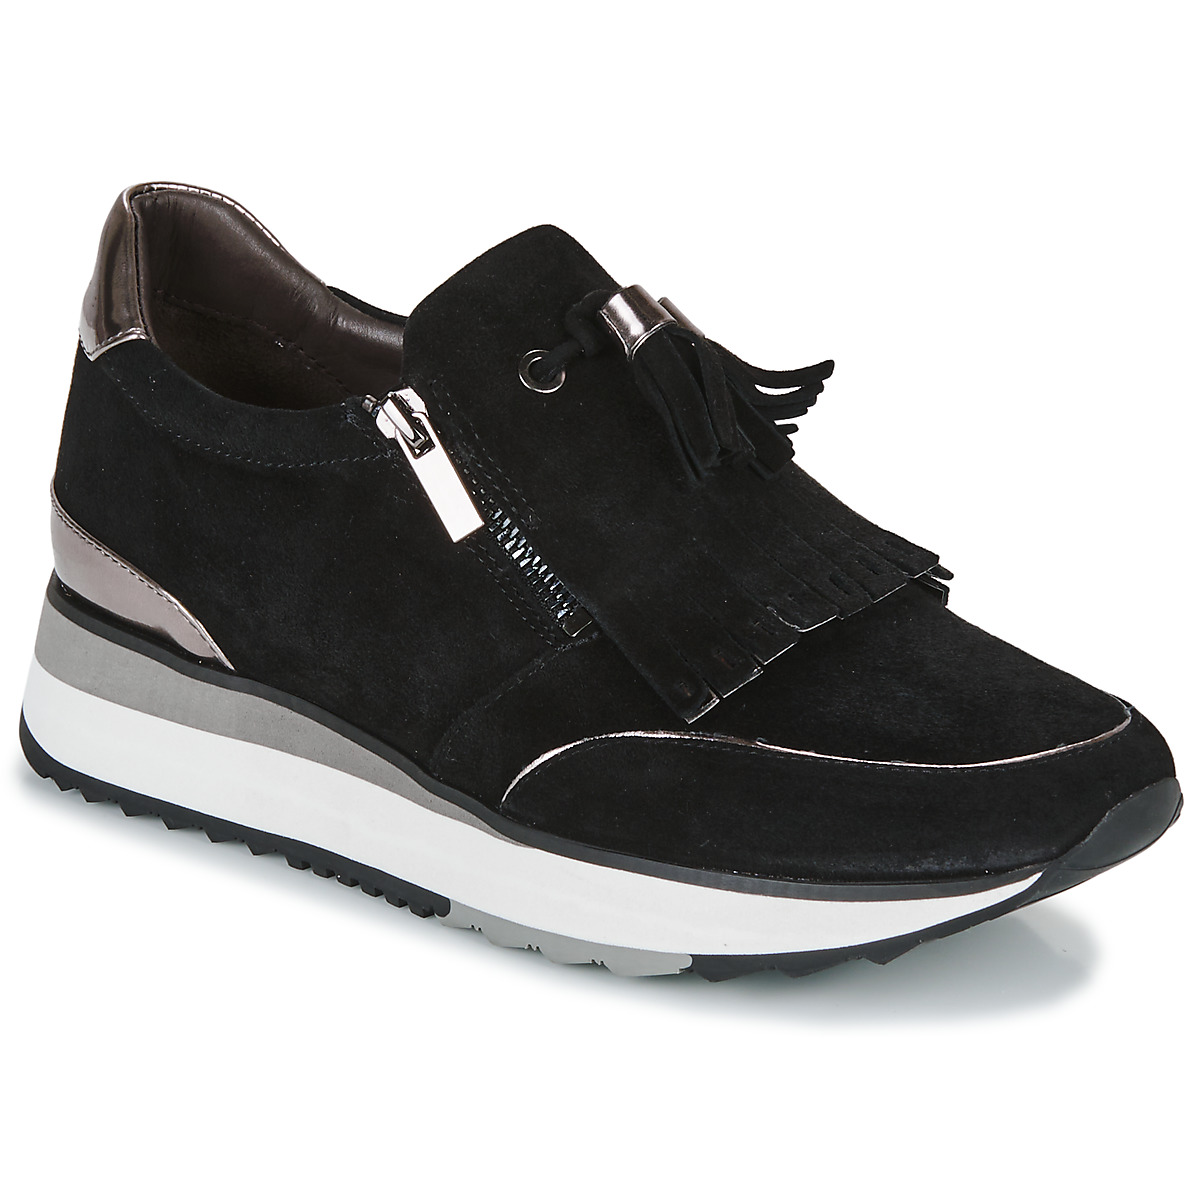 Shoes Women Low top trainers Adige Xave Black